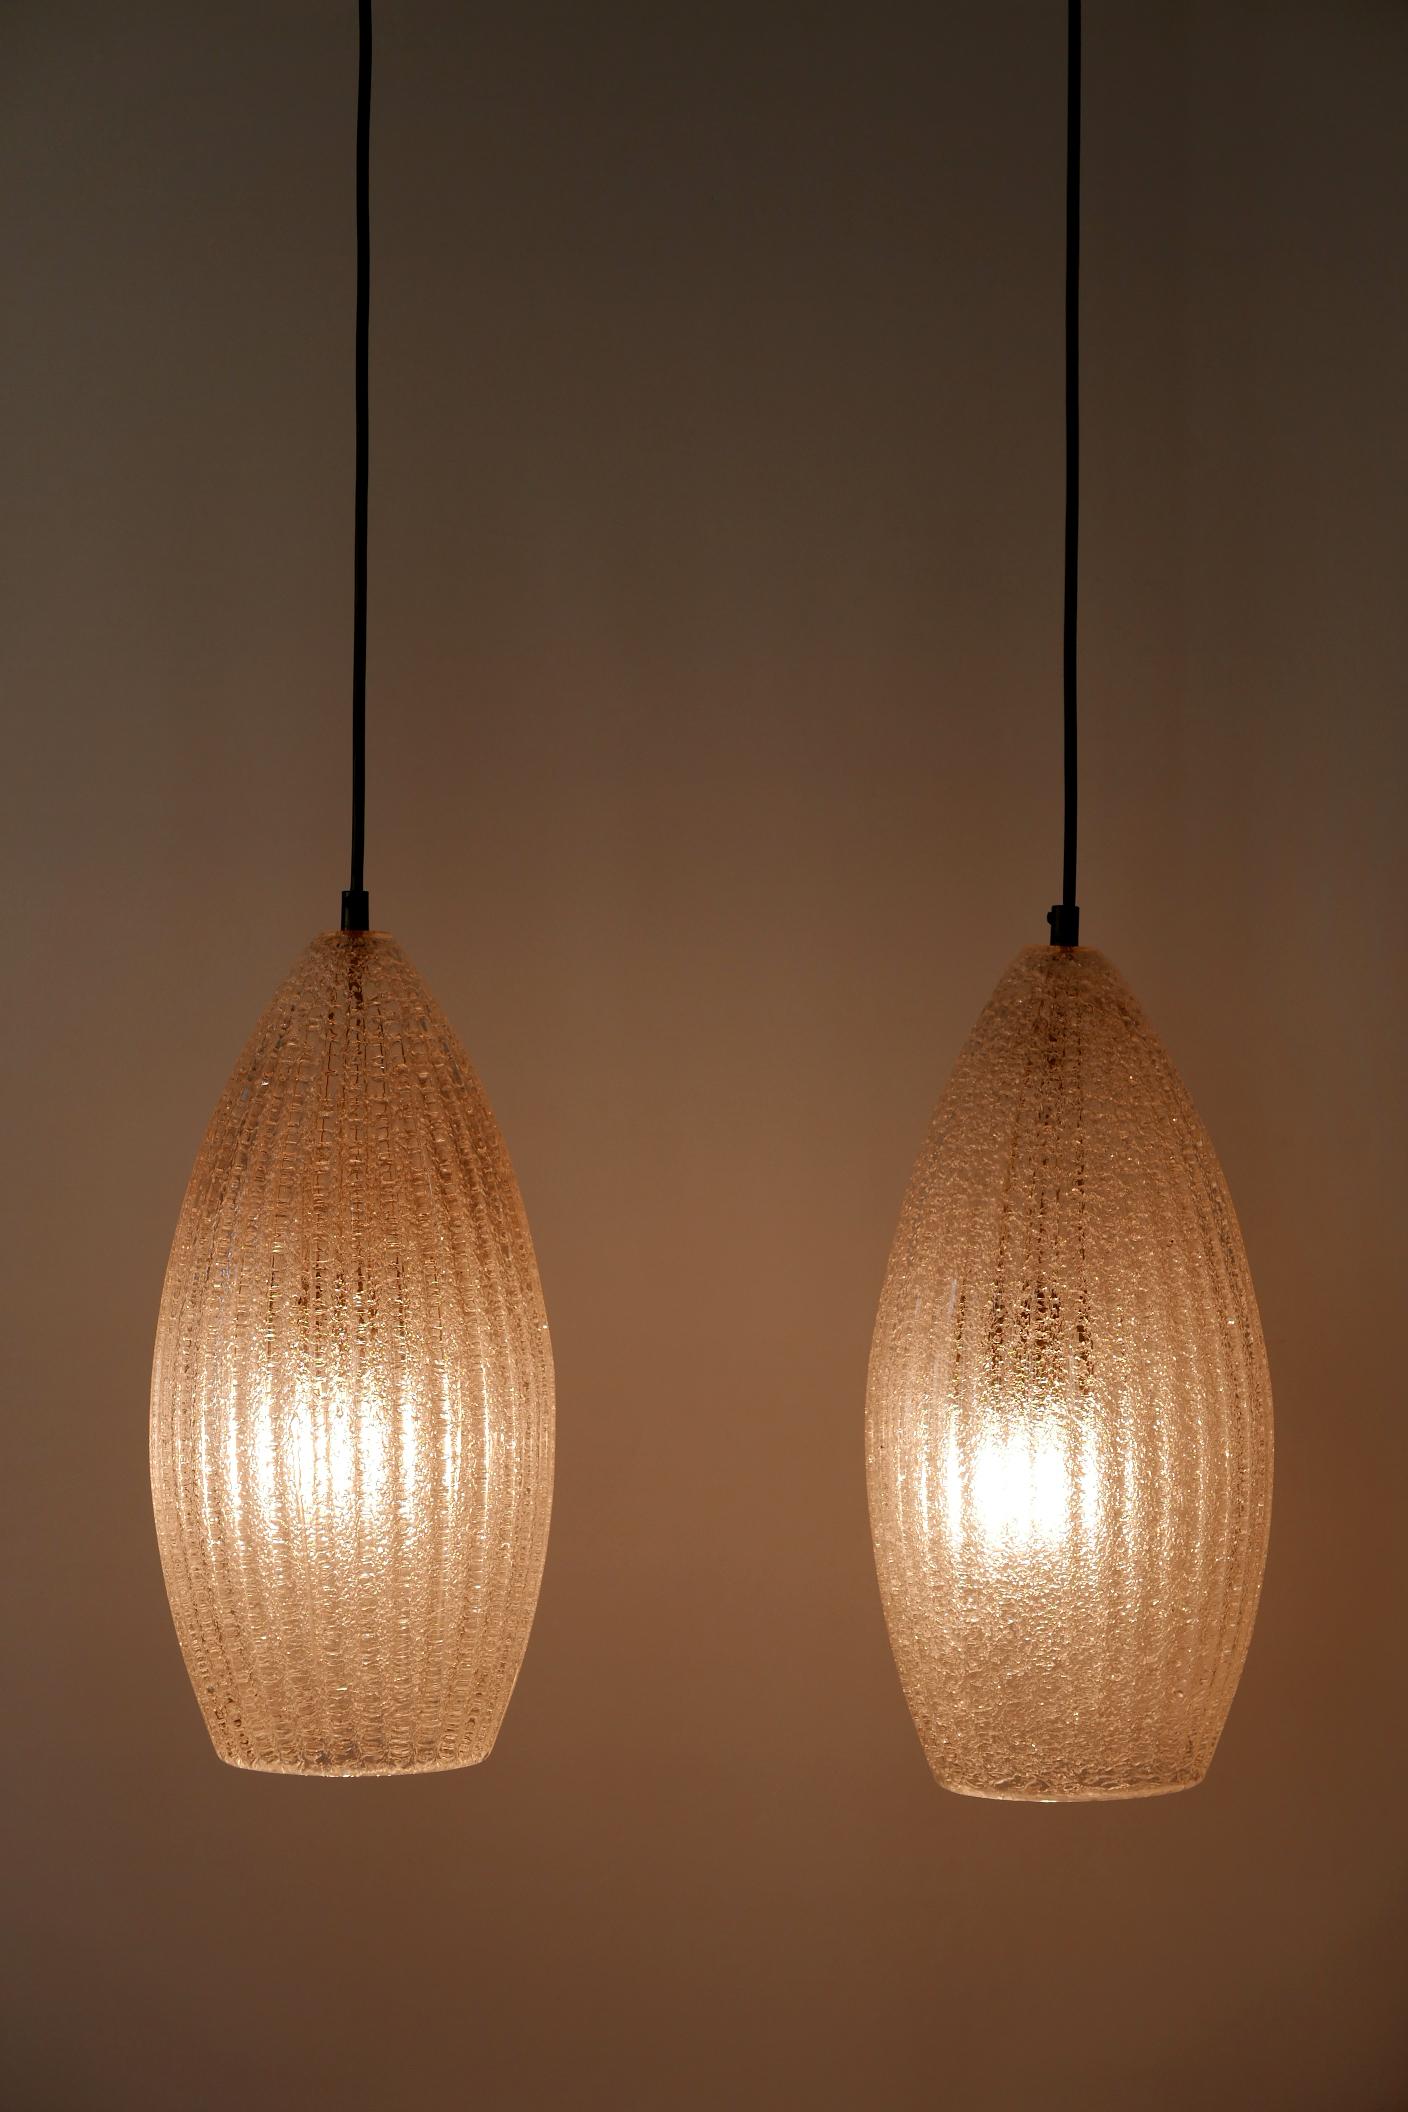 Set of Two Mid-Century Modern Textured Glass Pendant Lamps, 1960s, Germany In Good Condition For Sale In Munich, DE